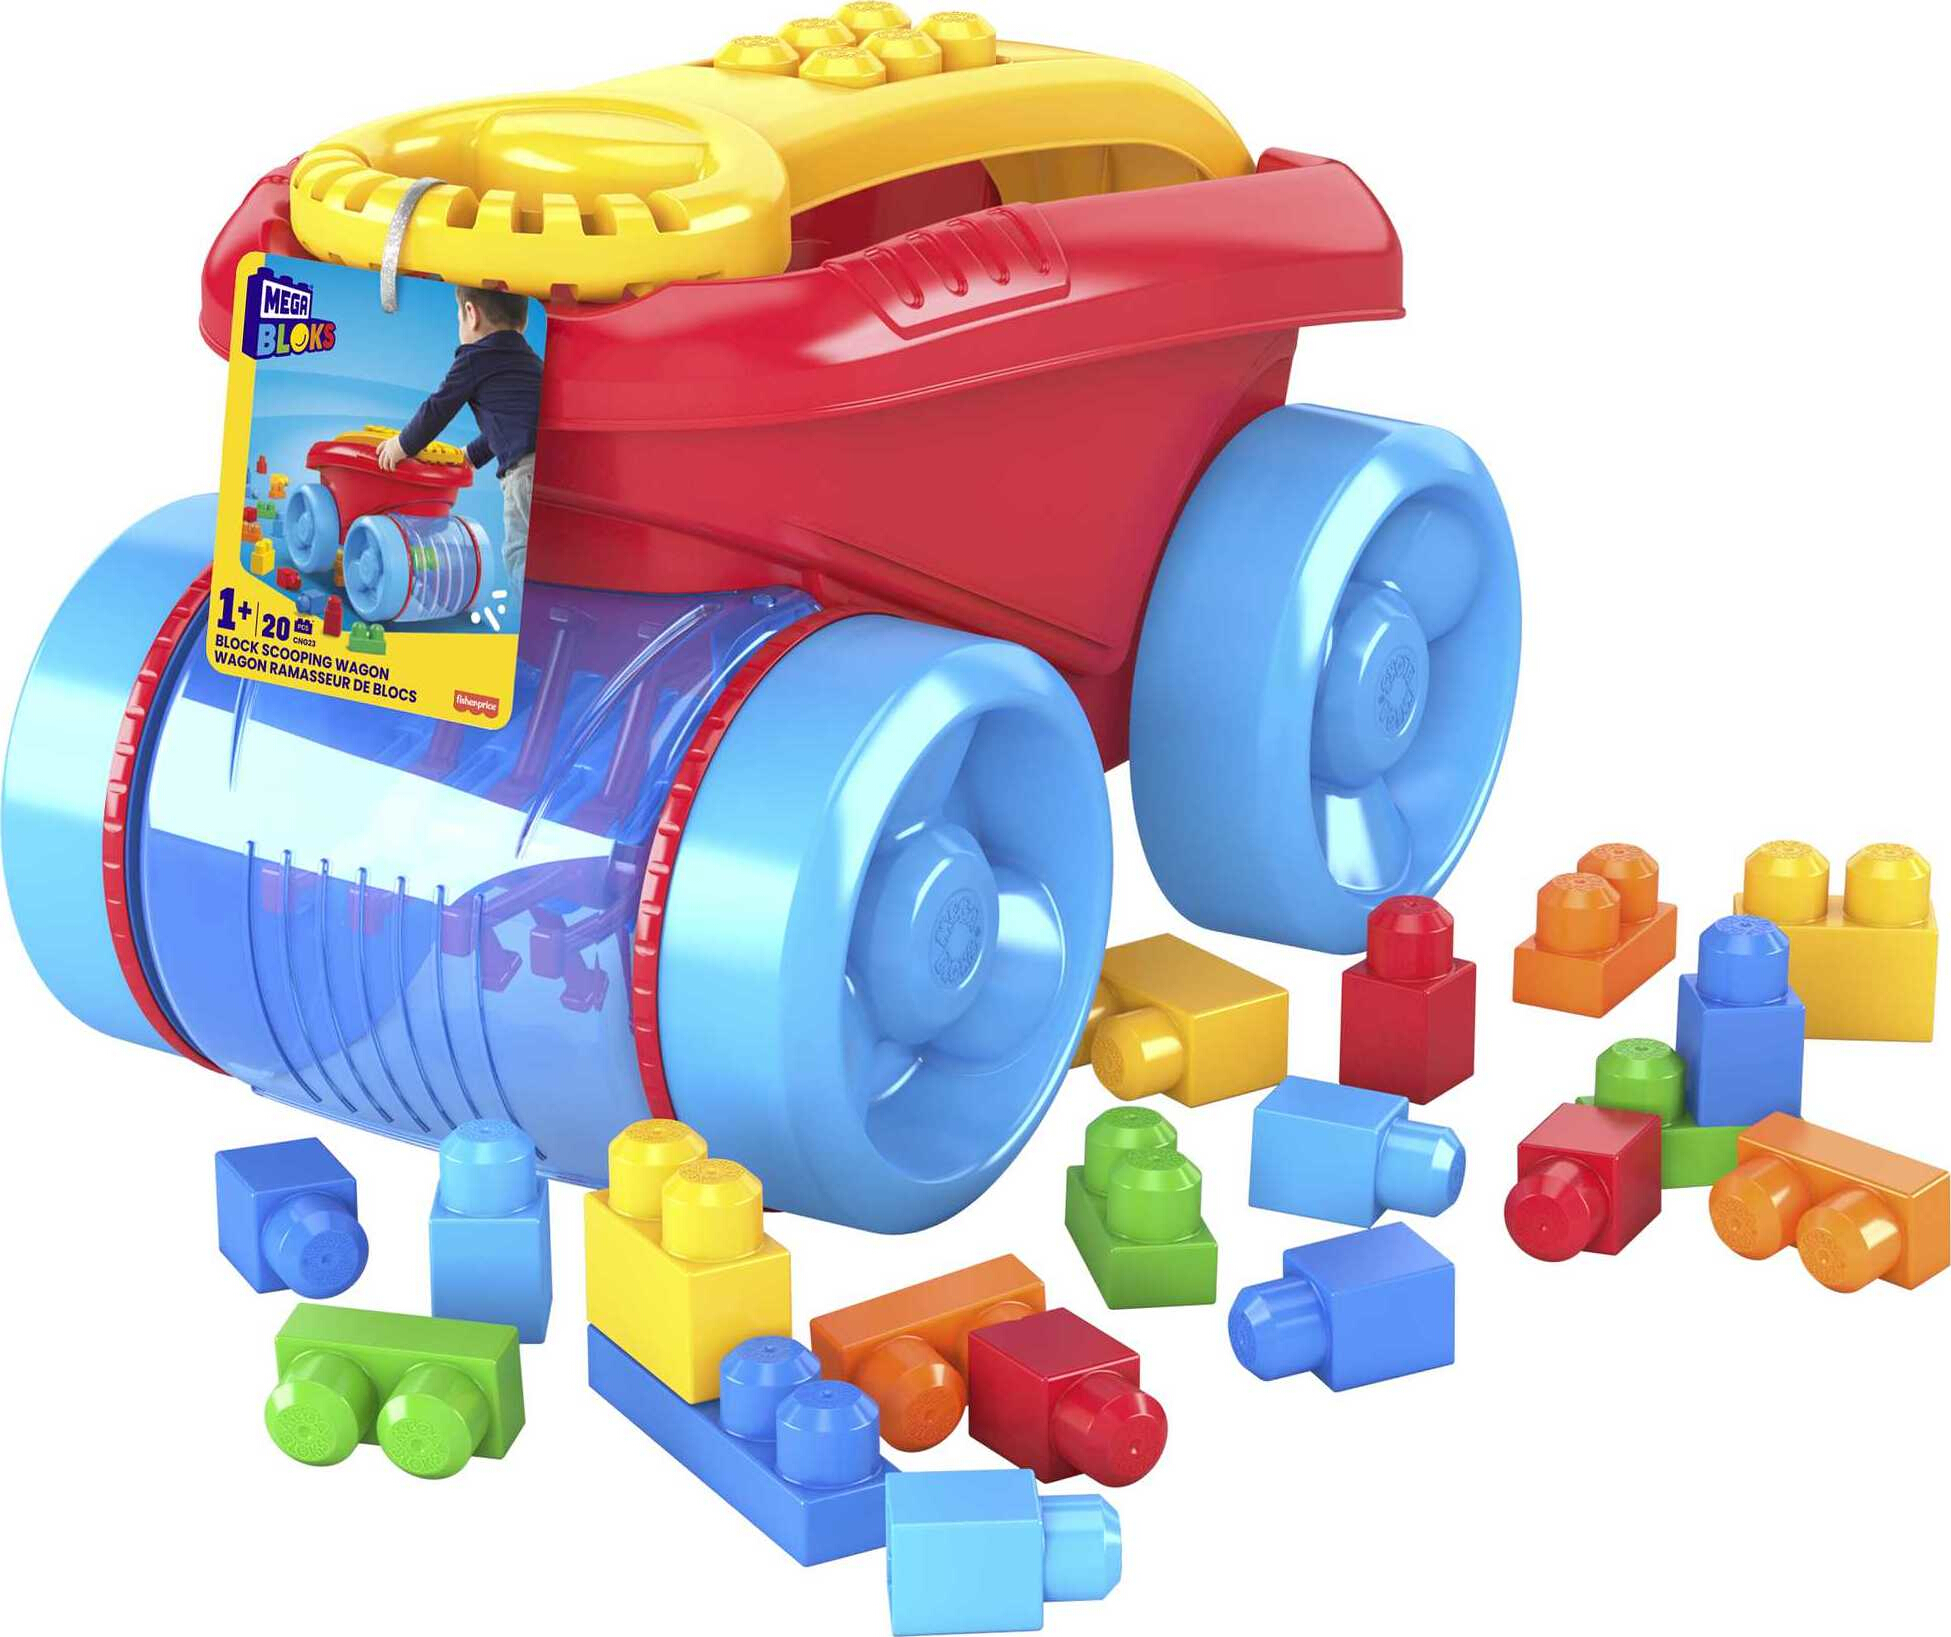 MEGA BLOKS Fisher-Price Blue Block Scooping Wagon Building Toy (21 Pieces) for Toddler - image 1 of 7